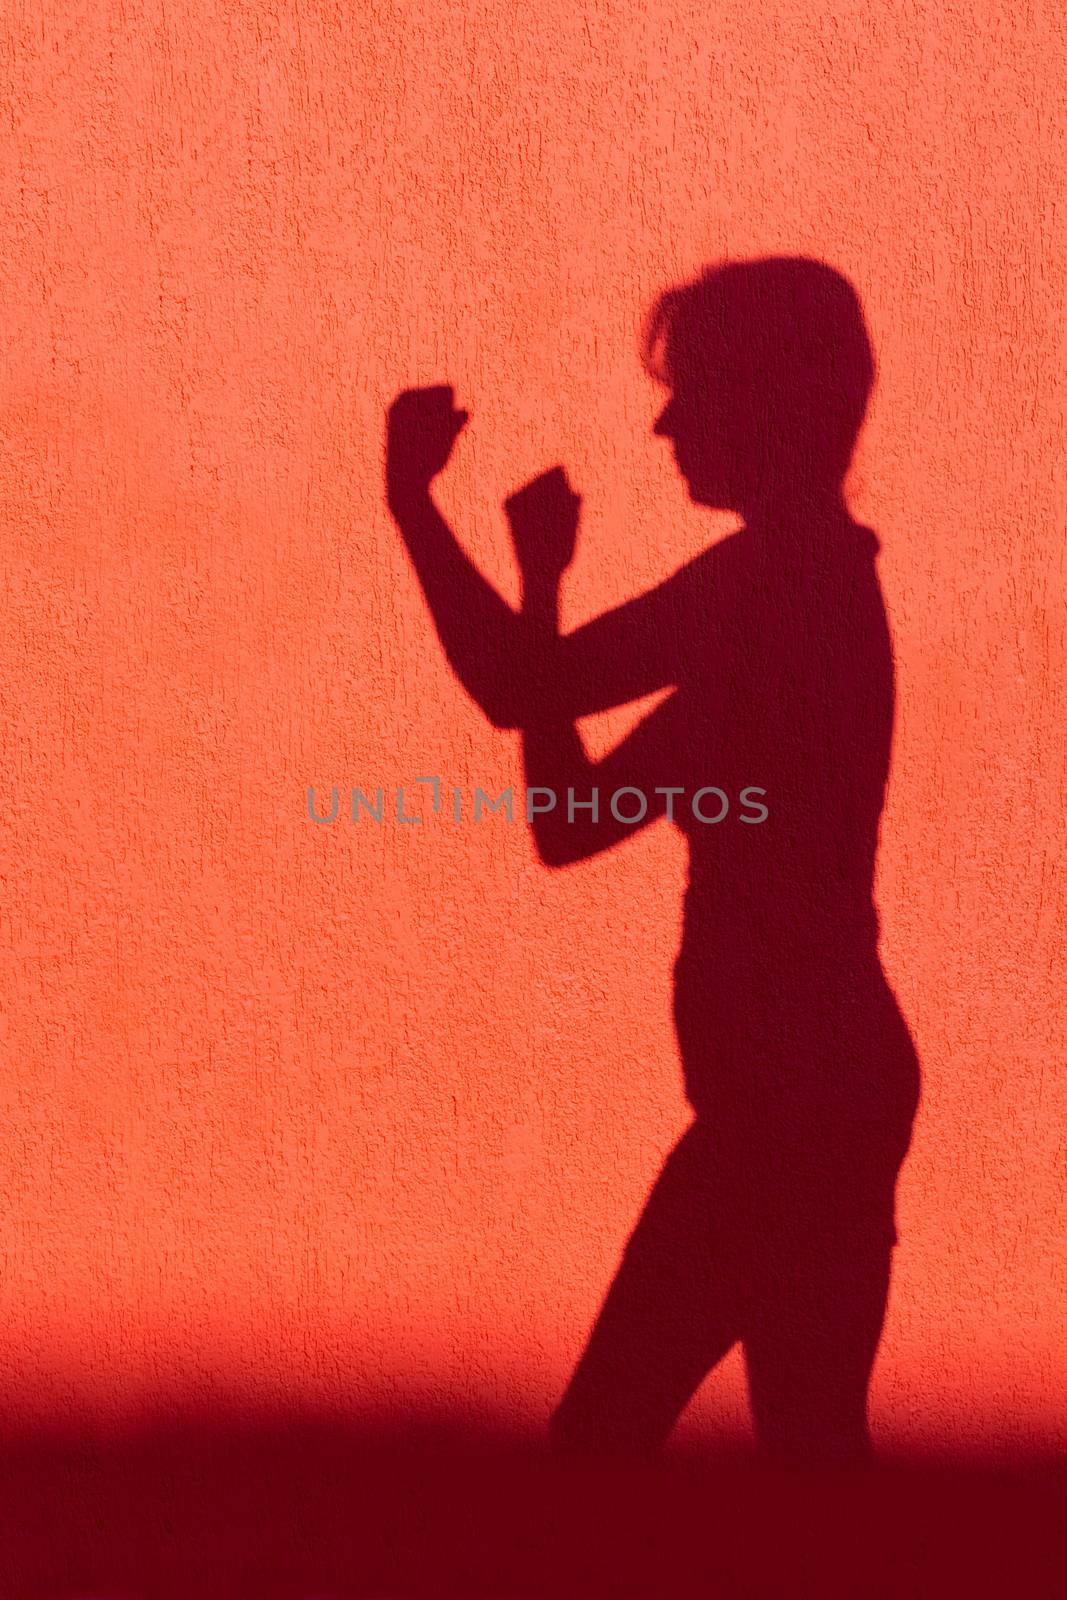 Silhouette of woman showing fists on red wall by BenSchonewille